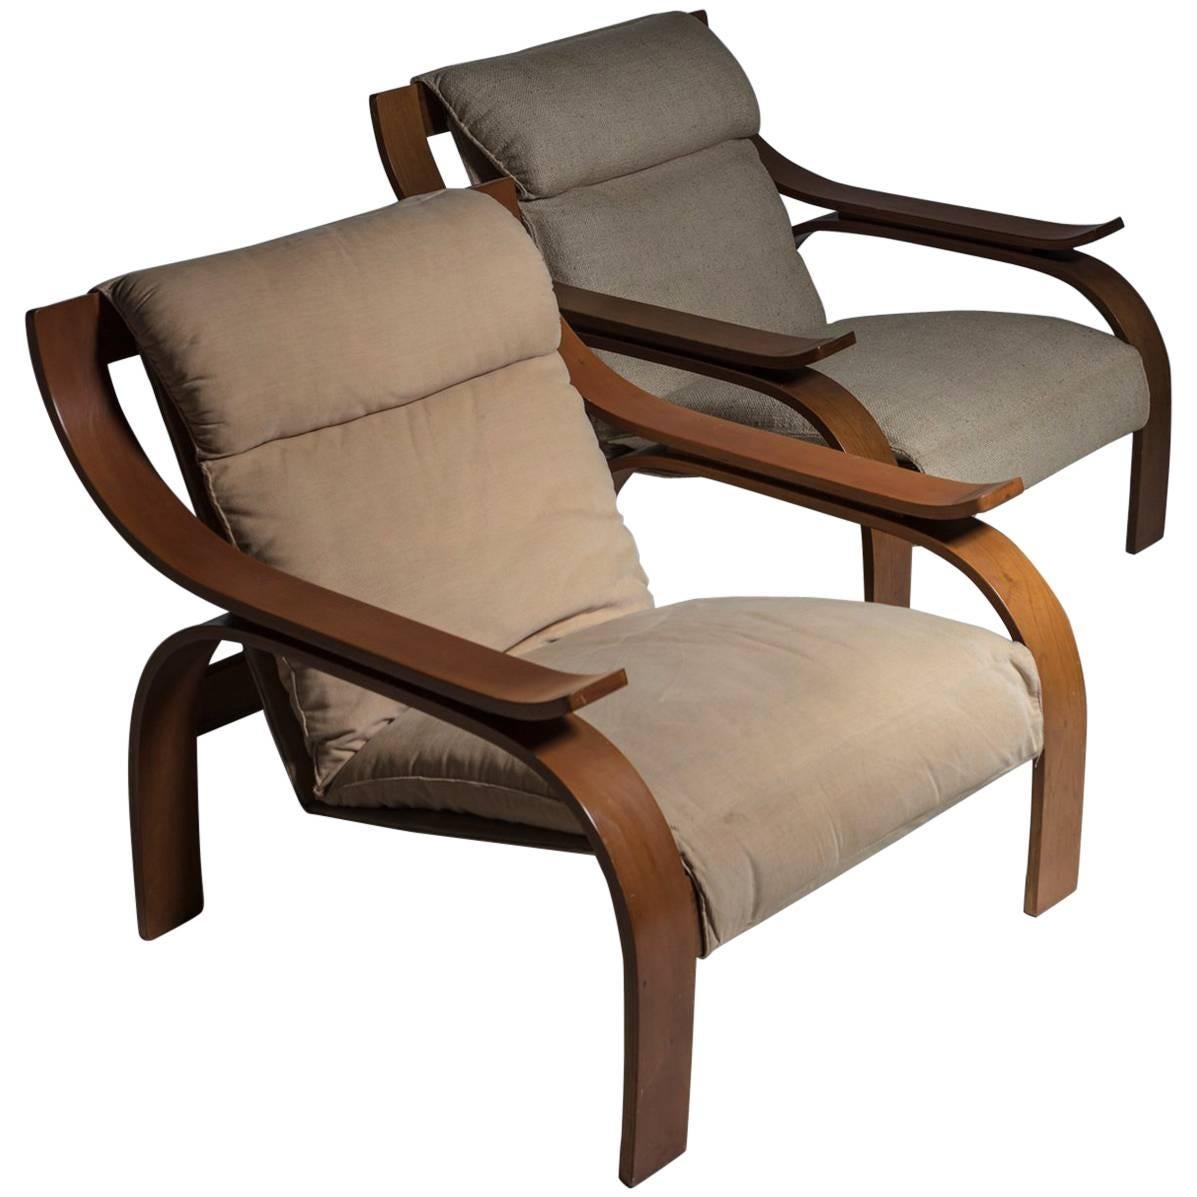 Pair of "Woodline" Lounge Chairs by Marco Zanuso for Arflex